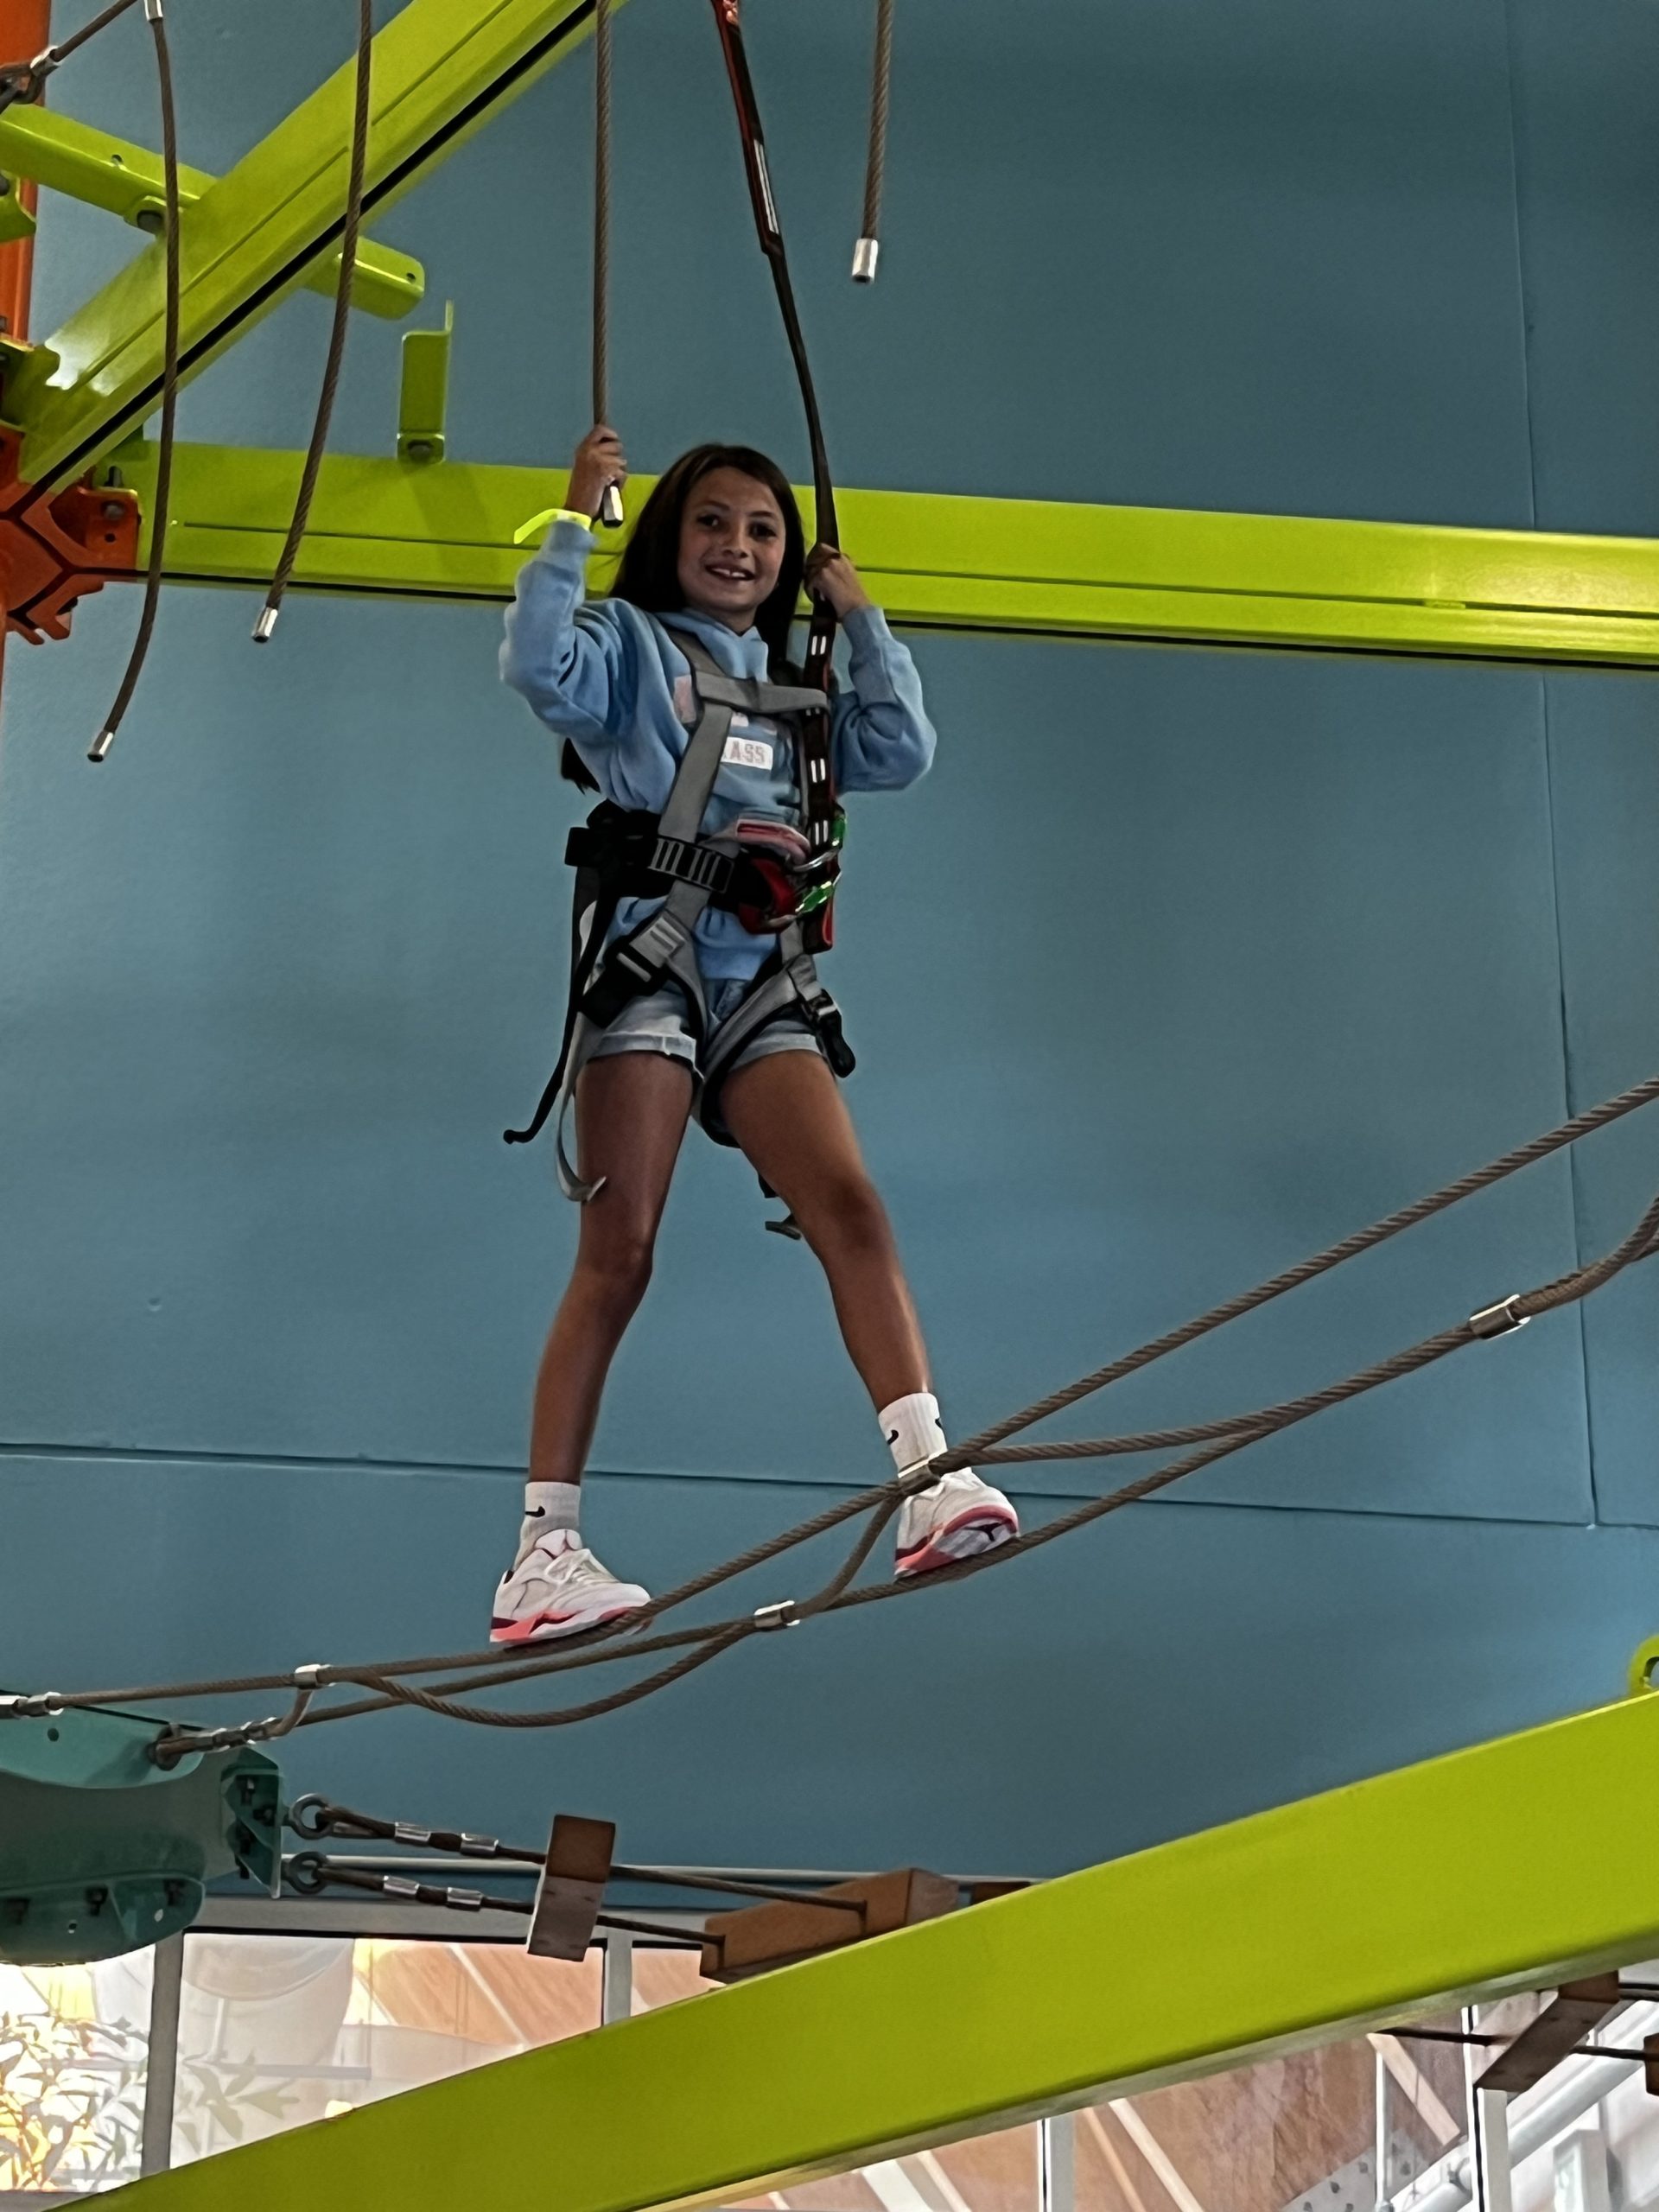 Walking on a ropes course at Kartrite Resort.